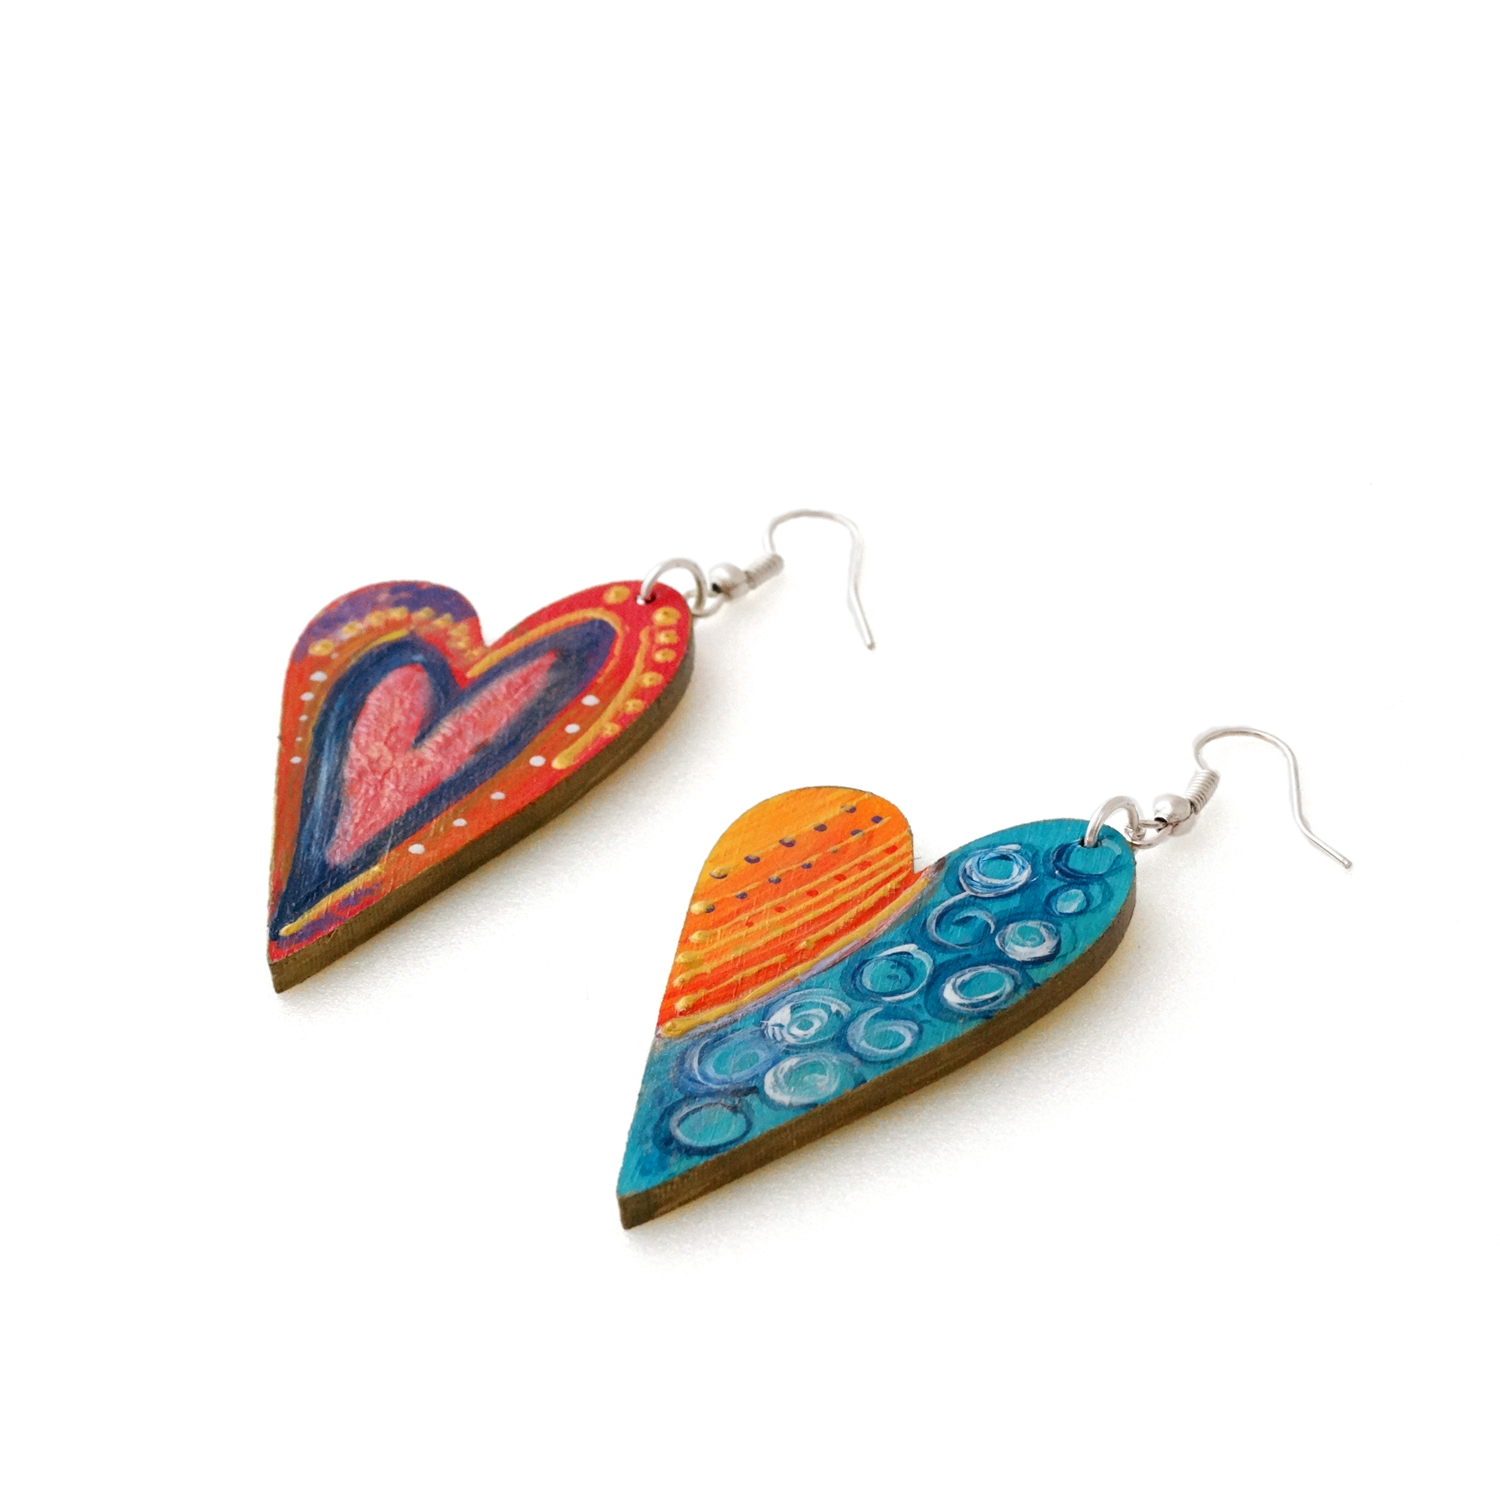 Hand-painted earrings - Love is all